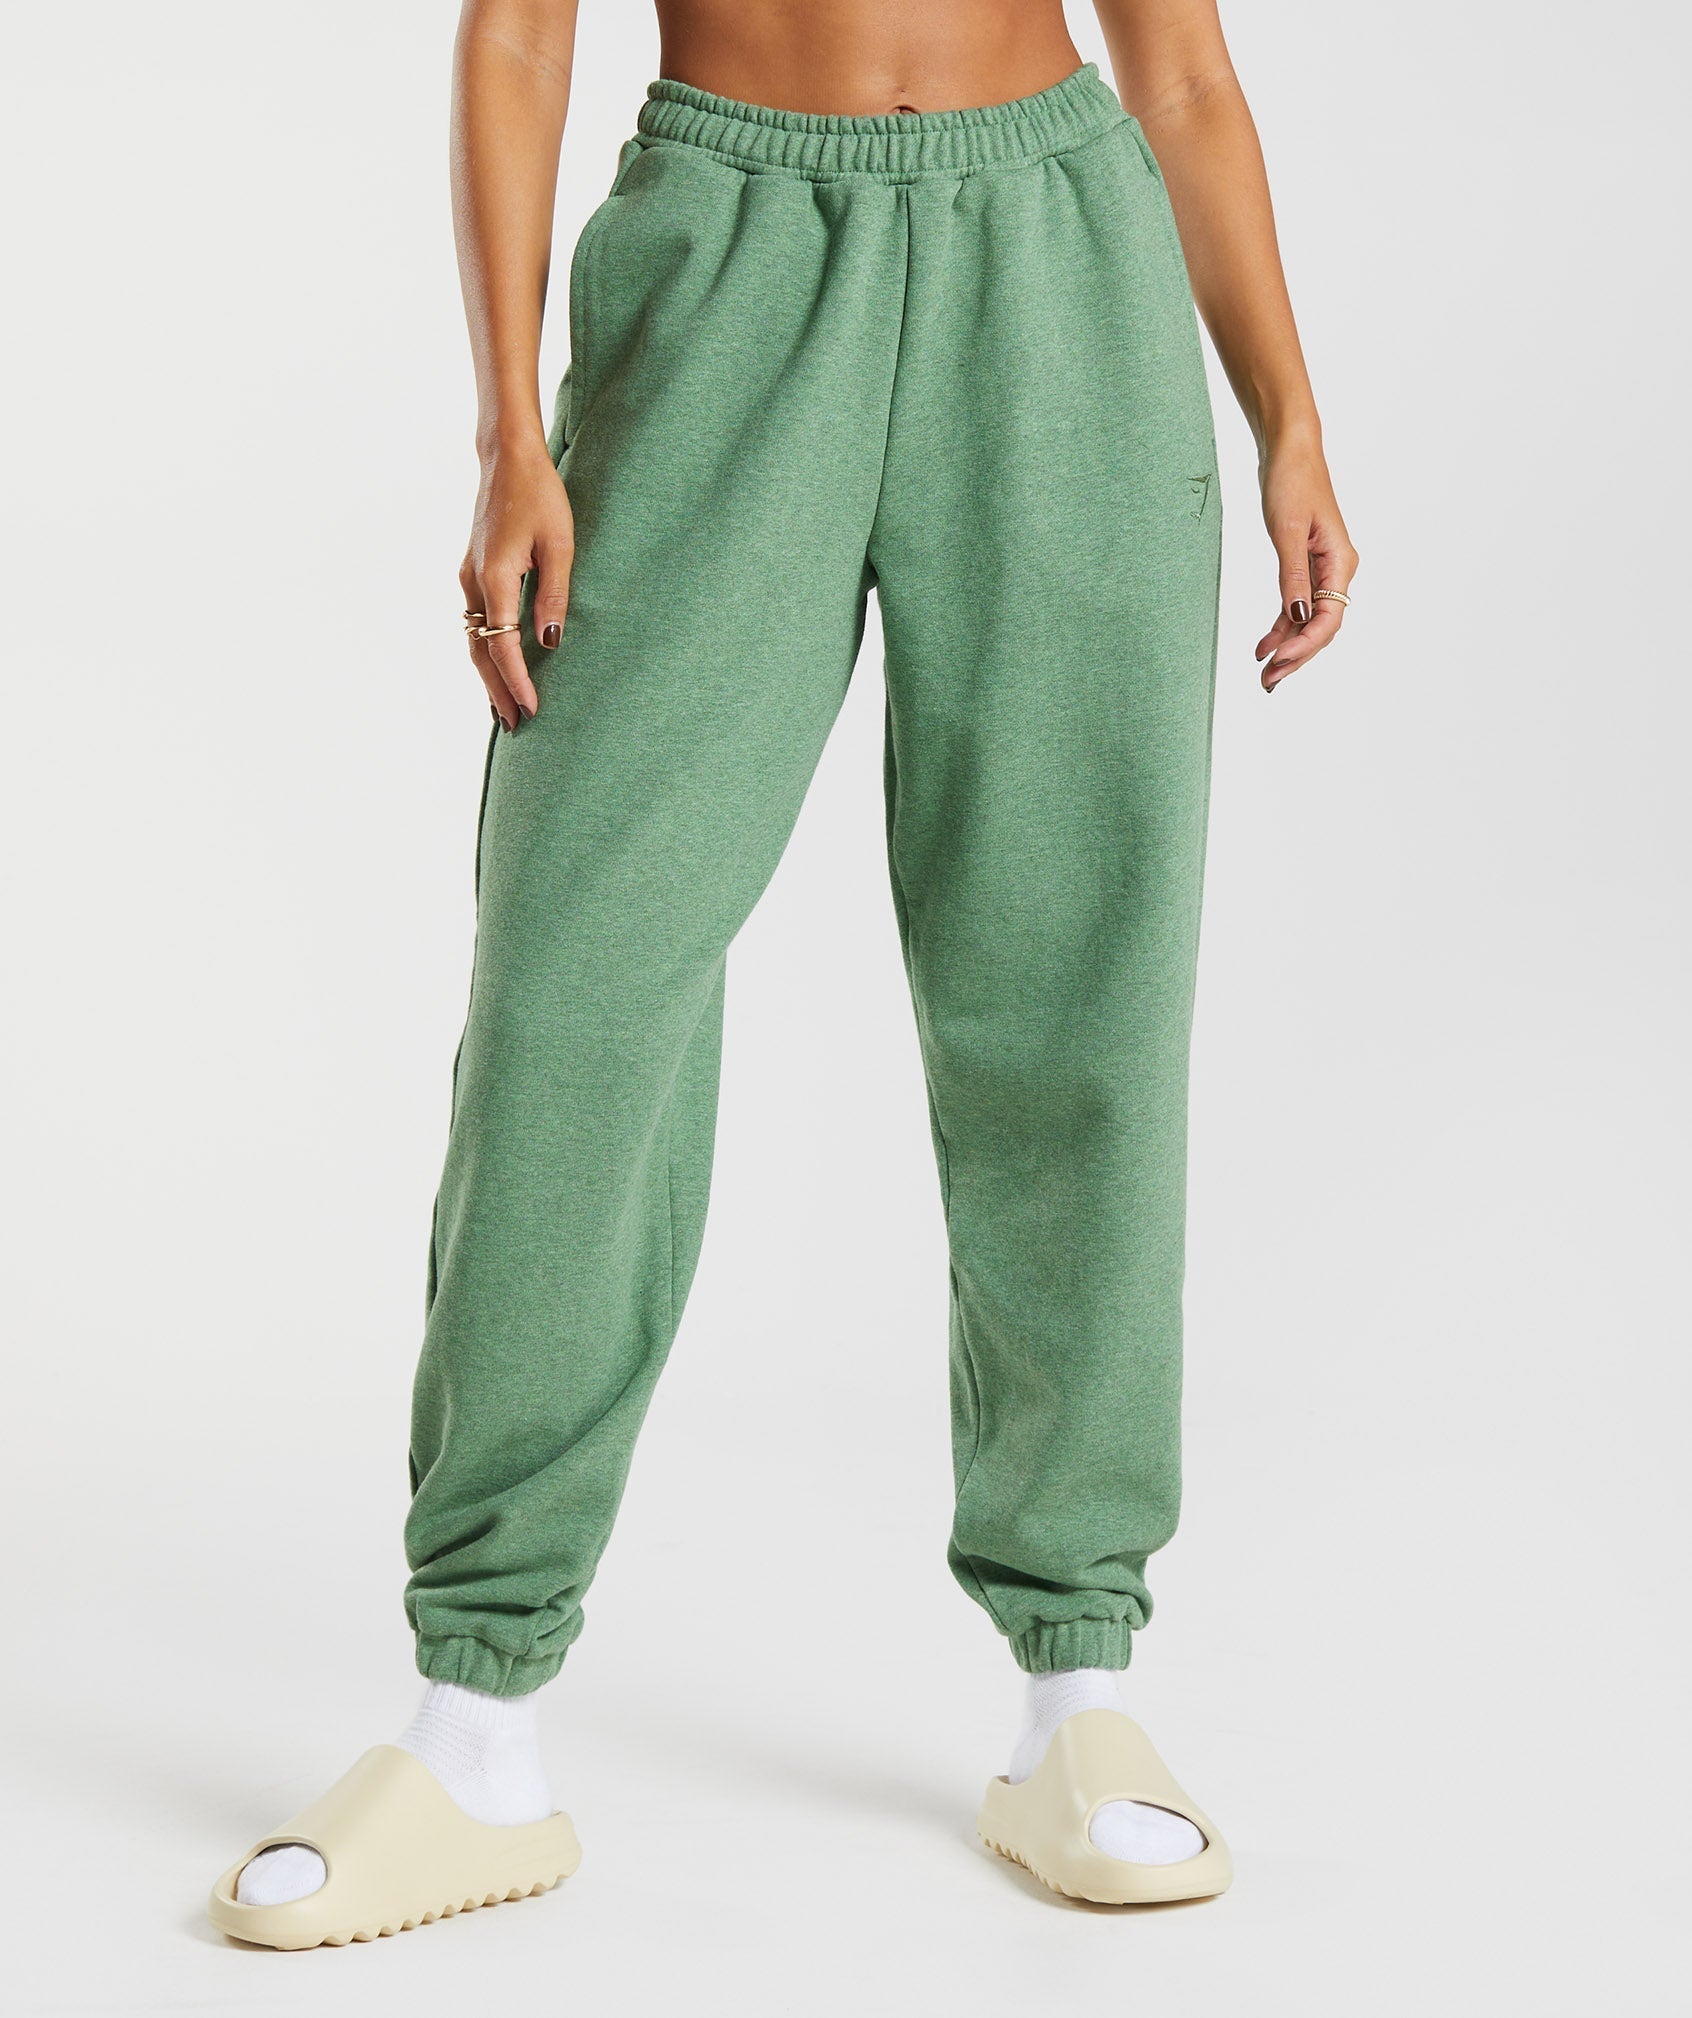 Rest Day Sweats Jogger in {{variantColor} is out of stock